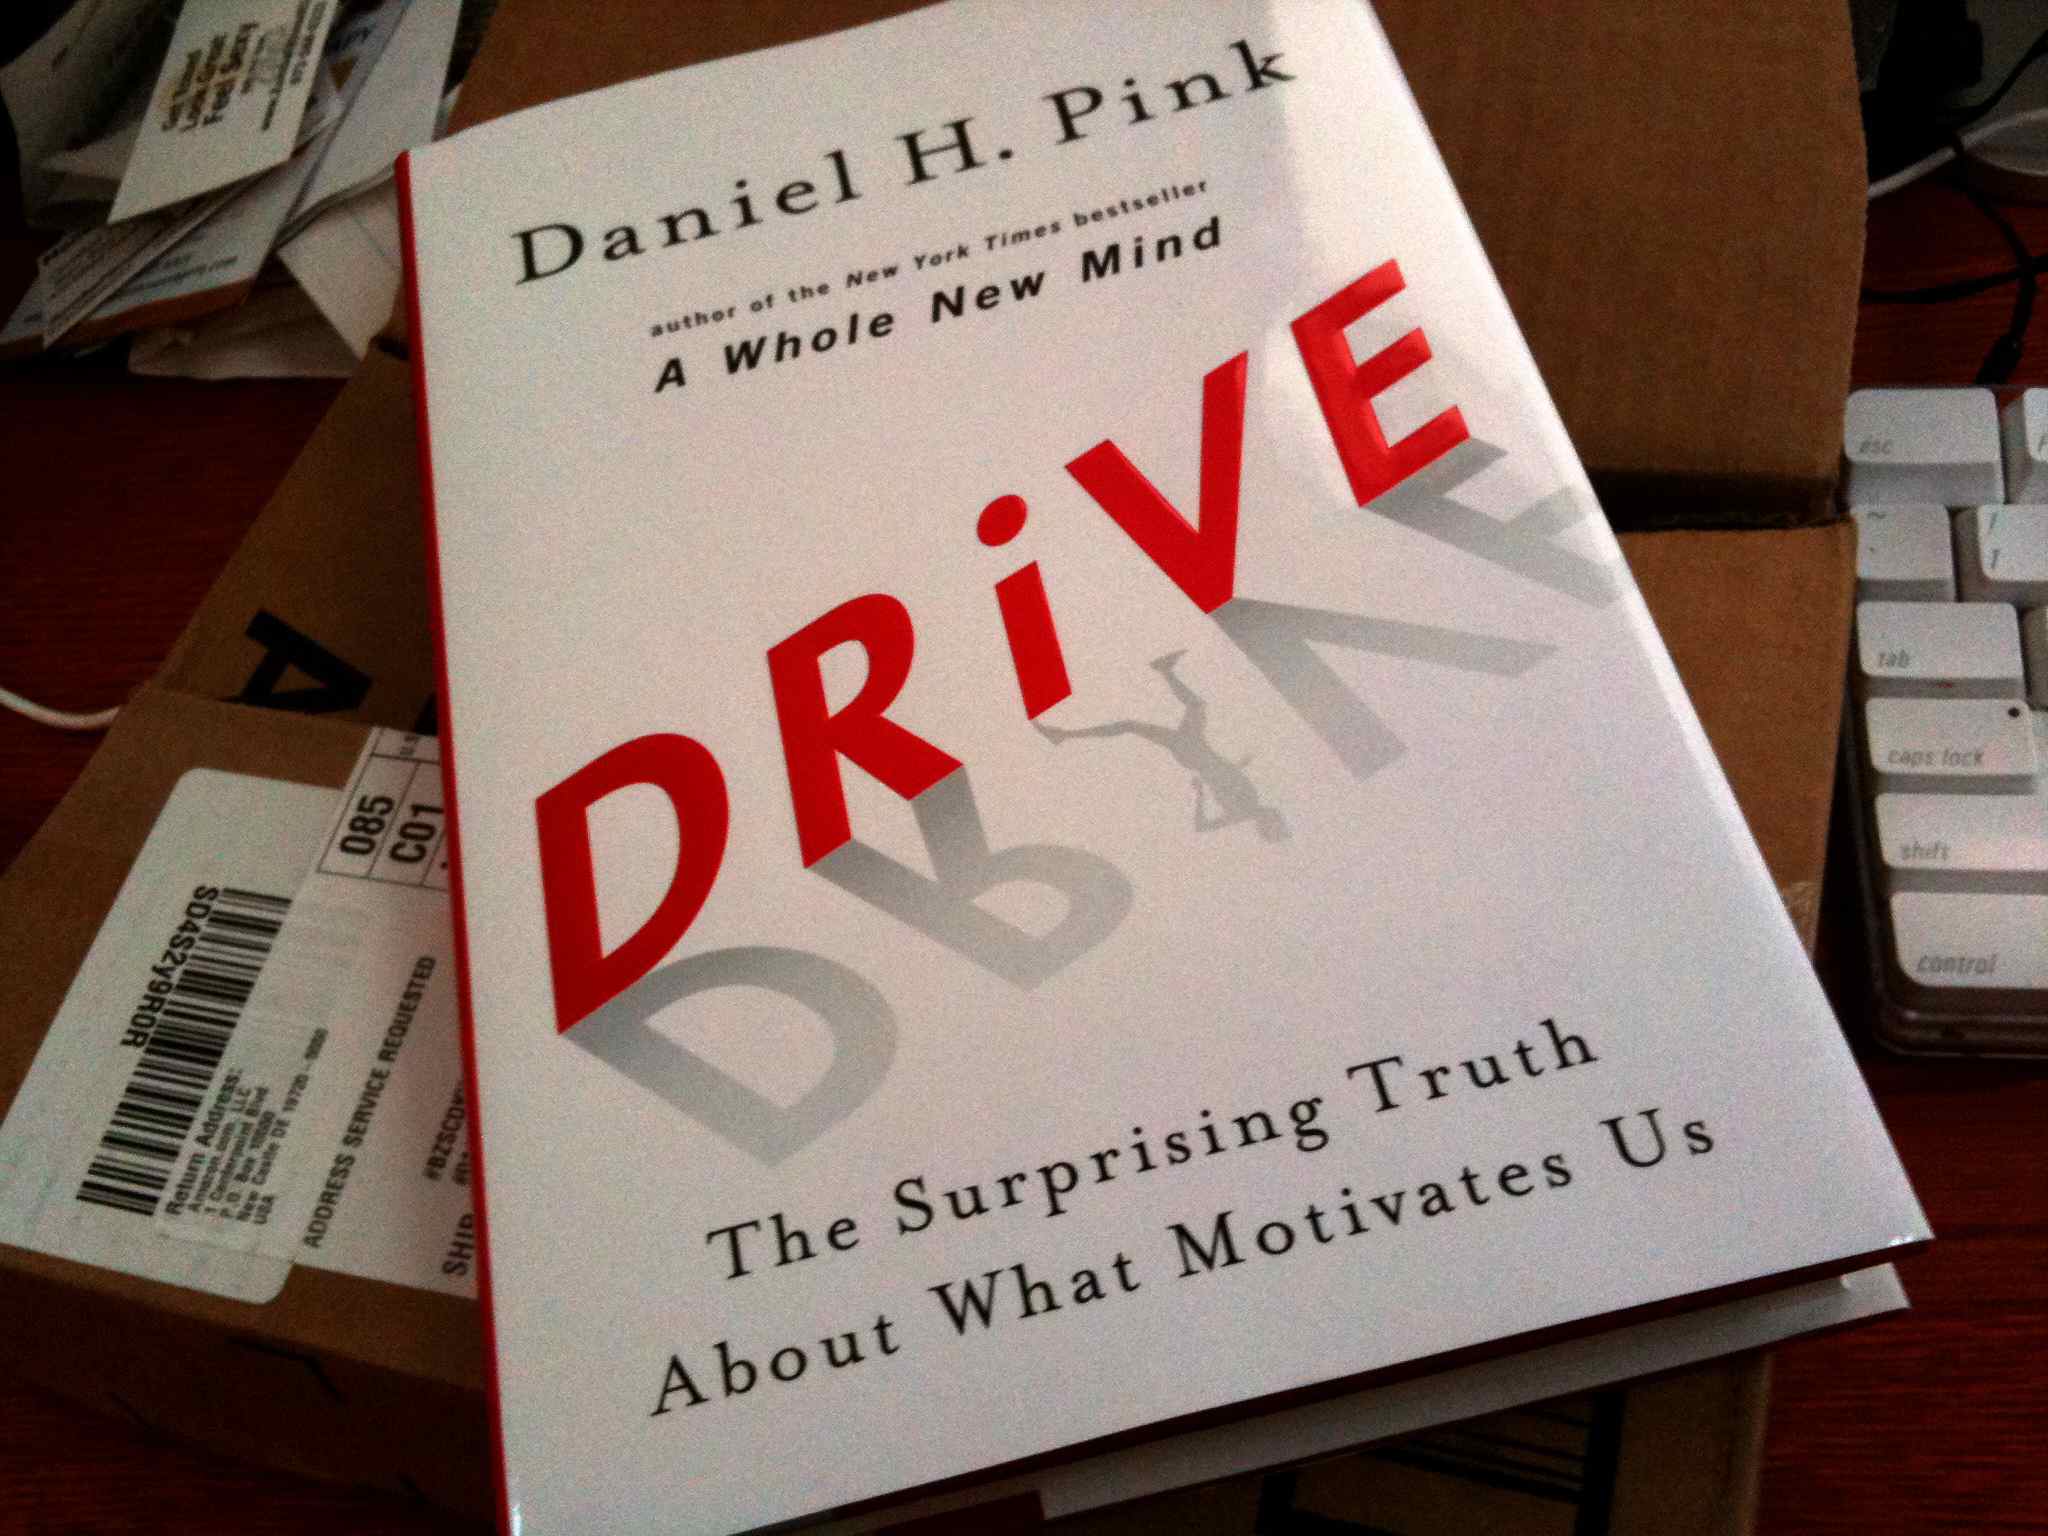 Daniel Pink – Drive: The Surprising Truth About What Motivates Us (RSAnimate)